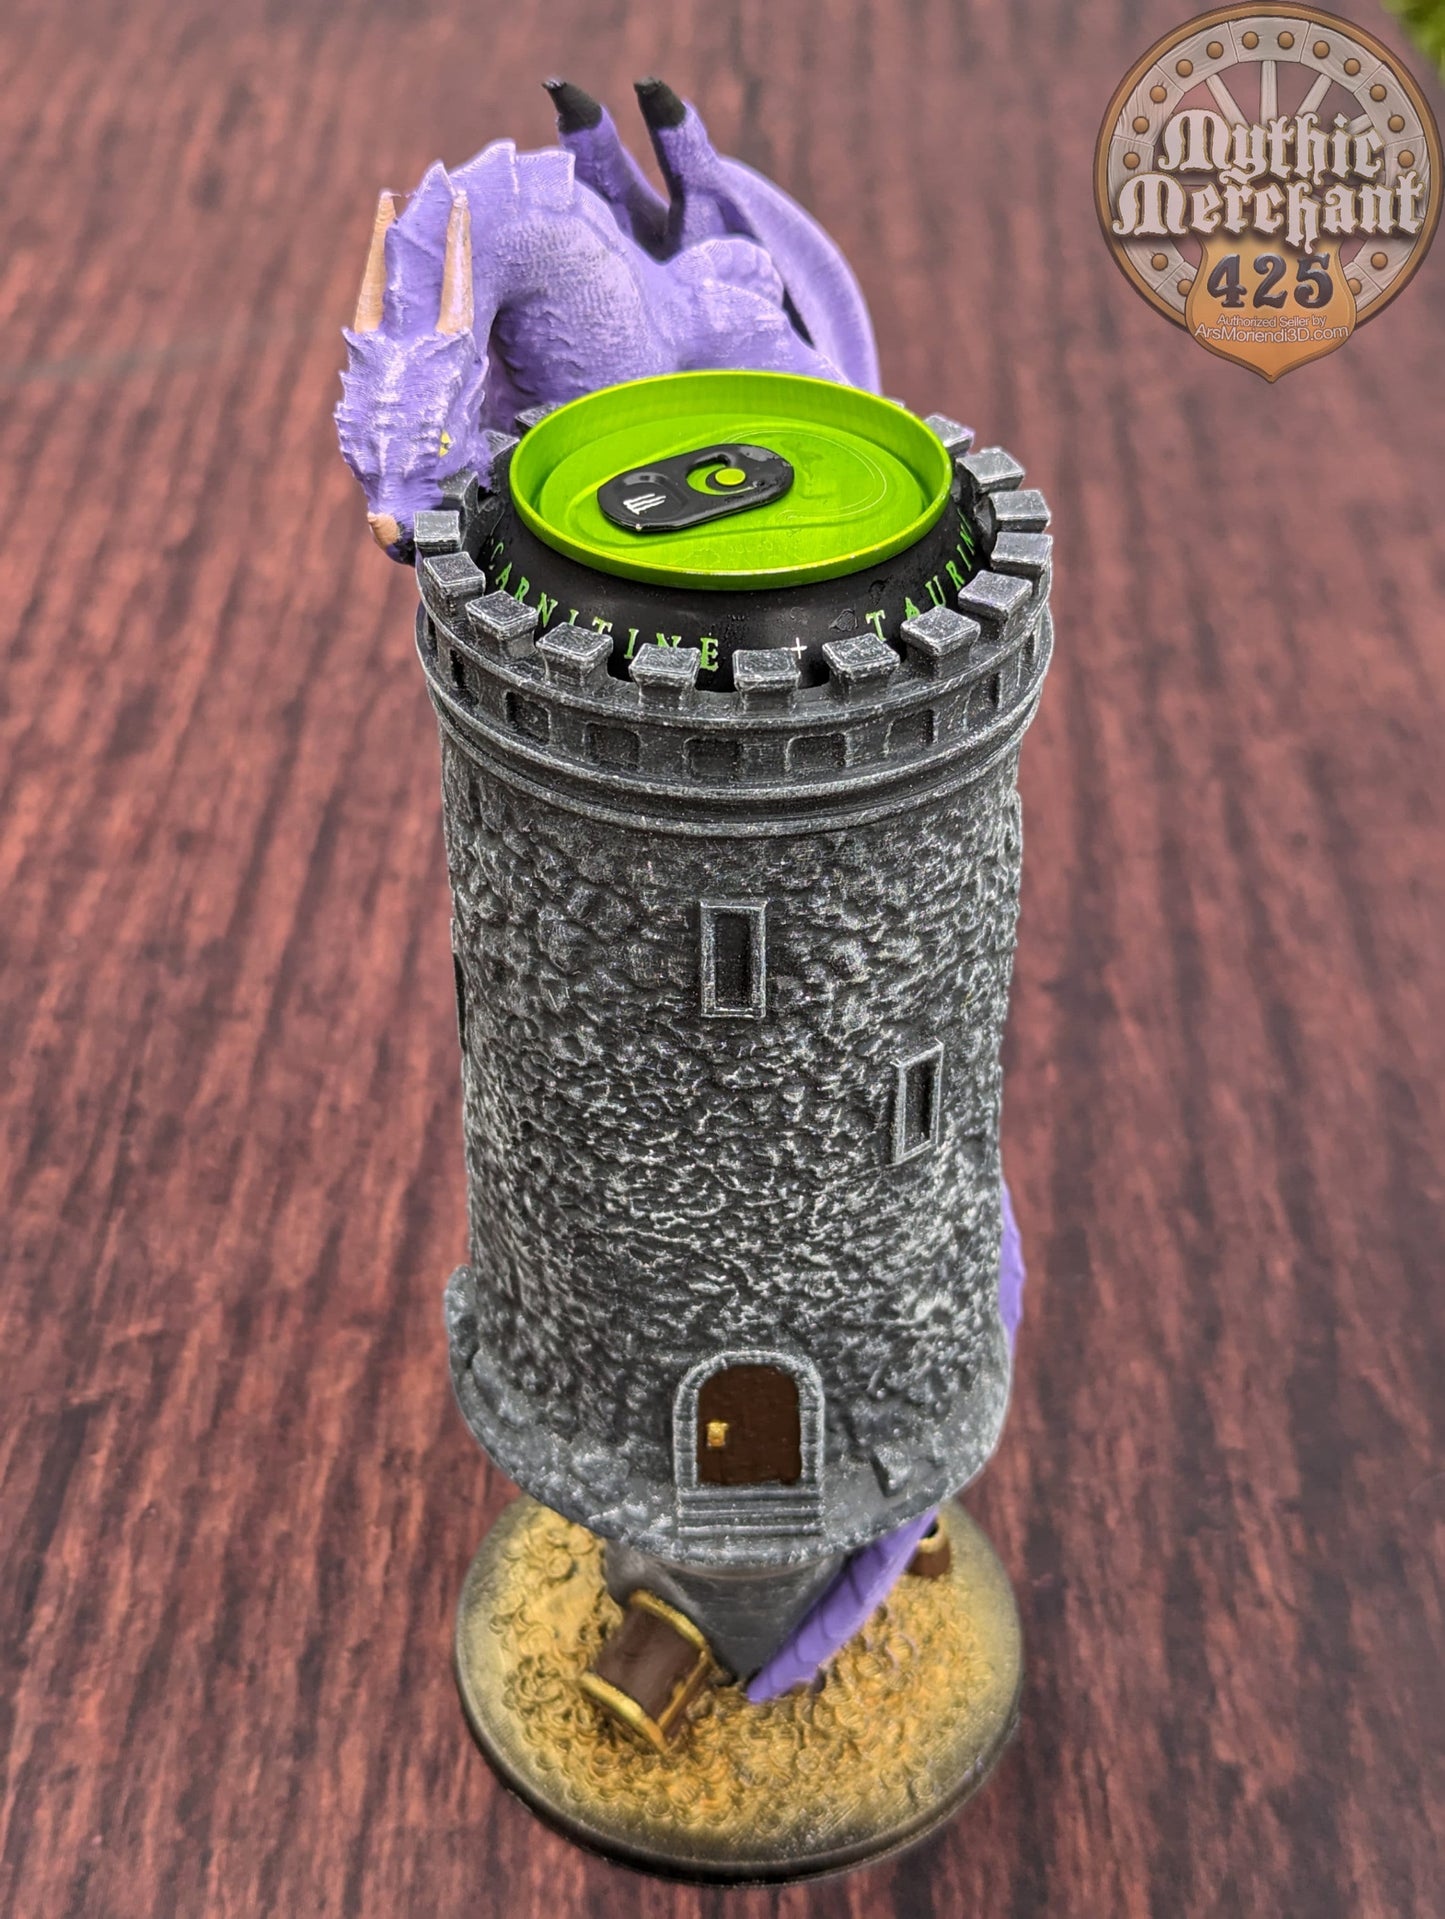 Dungeon-Game Master 3D Printed Mythic Mug Stein | Tabletop RPG Gaming Cosplay - Dungeons and Dragon DnD D&D Wargaming | Koozie Can Holder